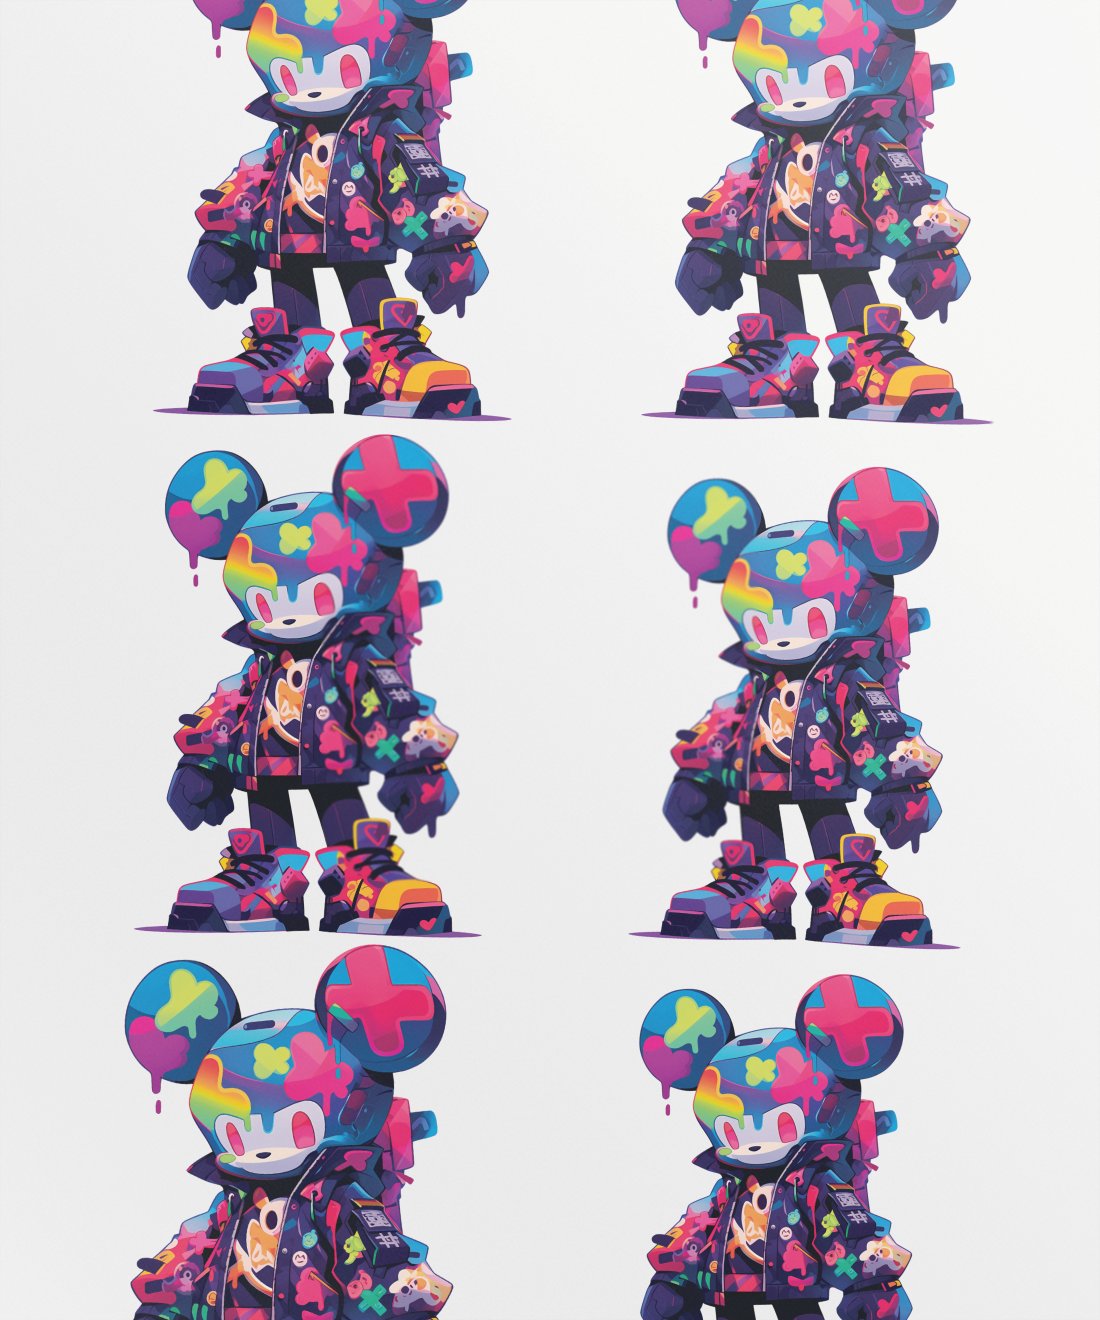 mickey-mouse-robot-character-in-colorful-jacket-vibrant-cartoon-art - Image 1